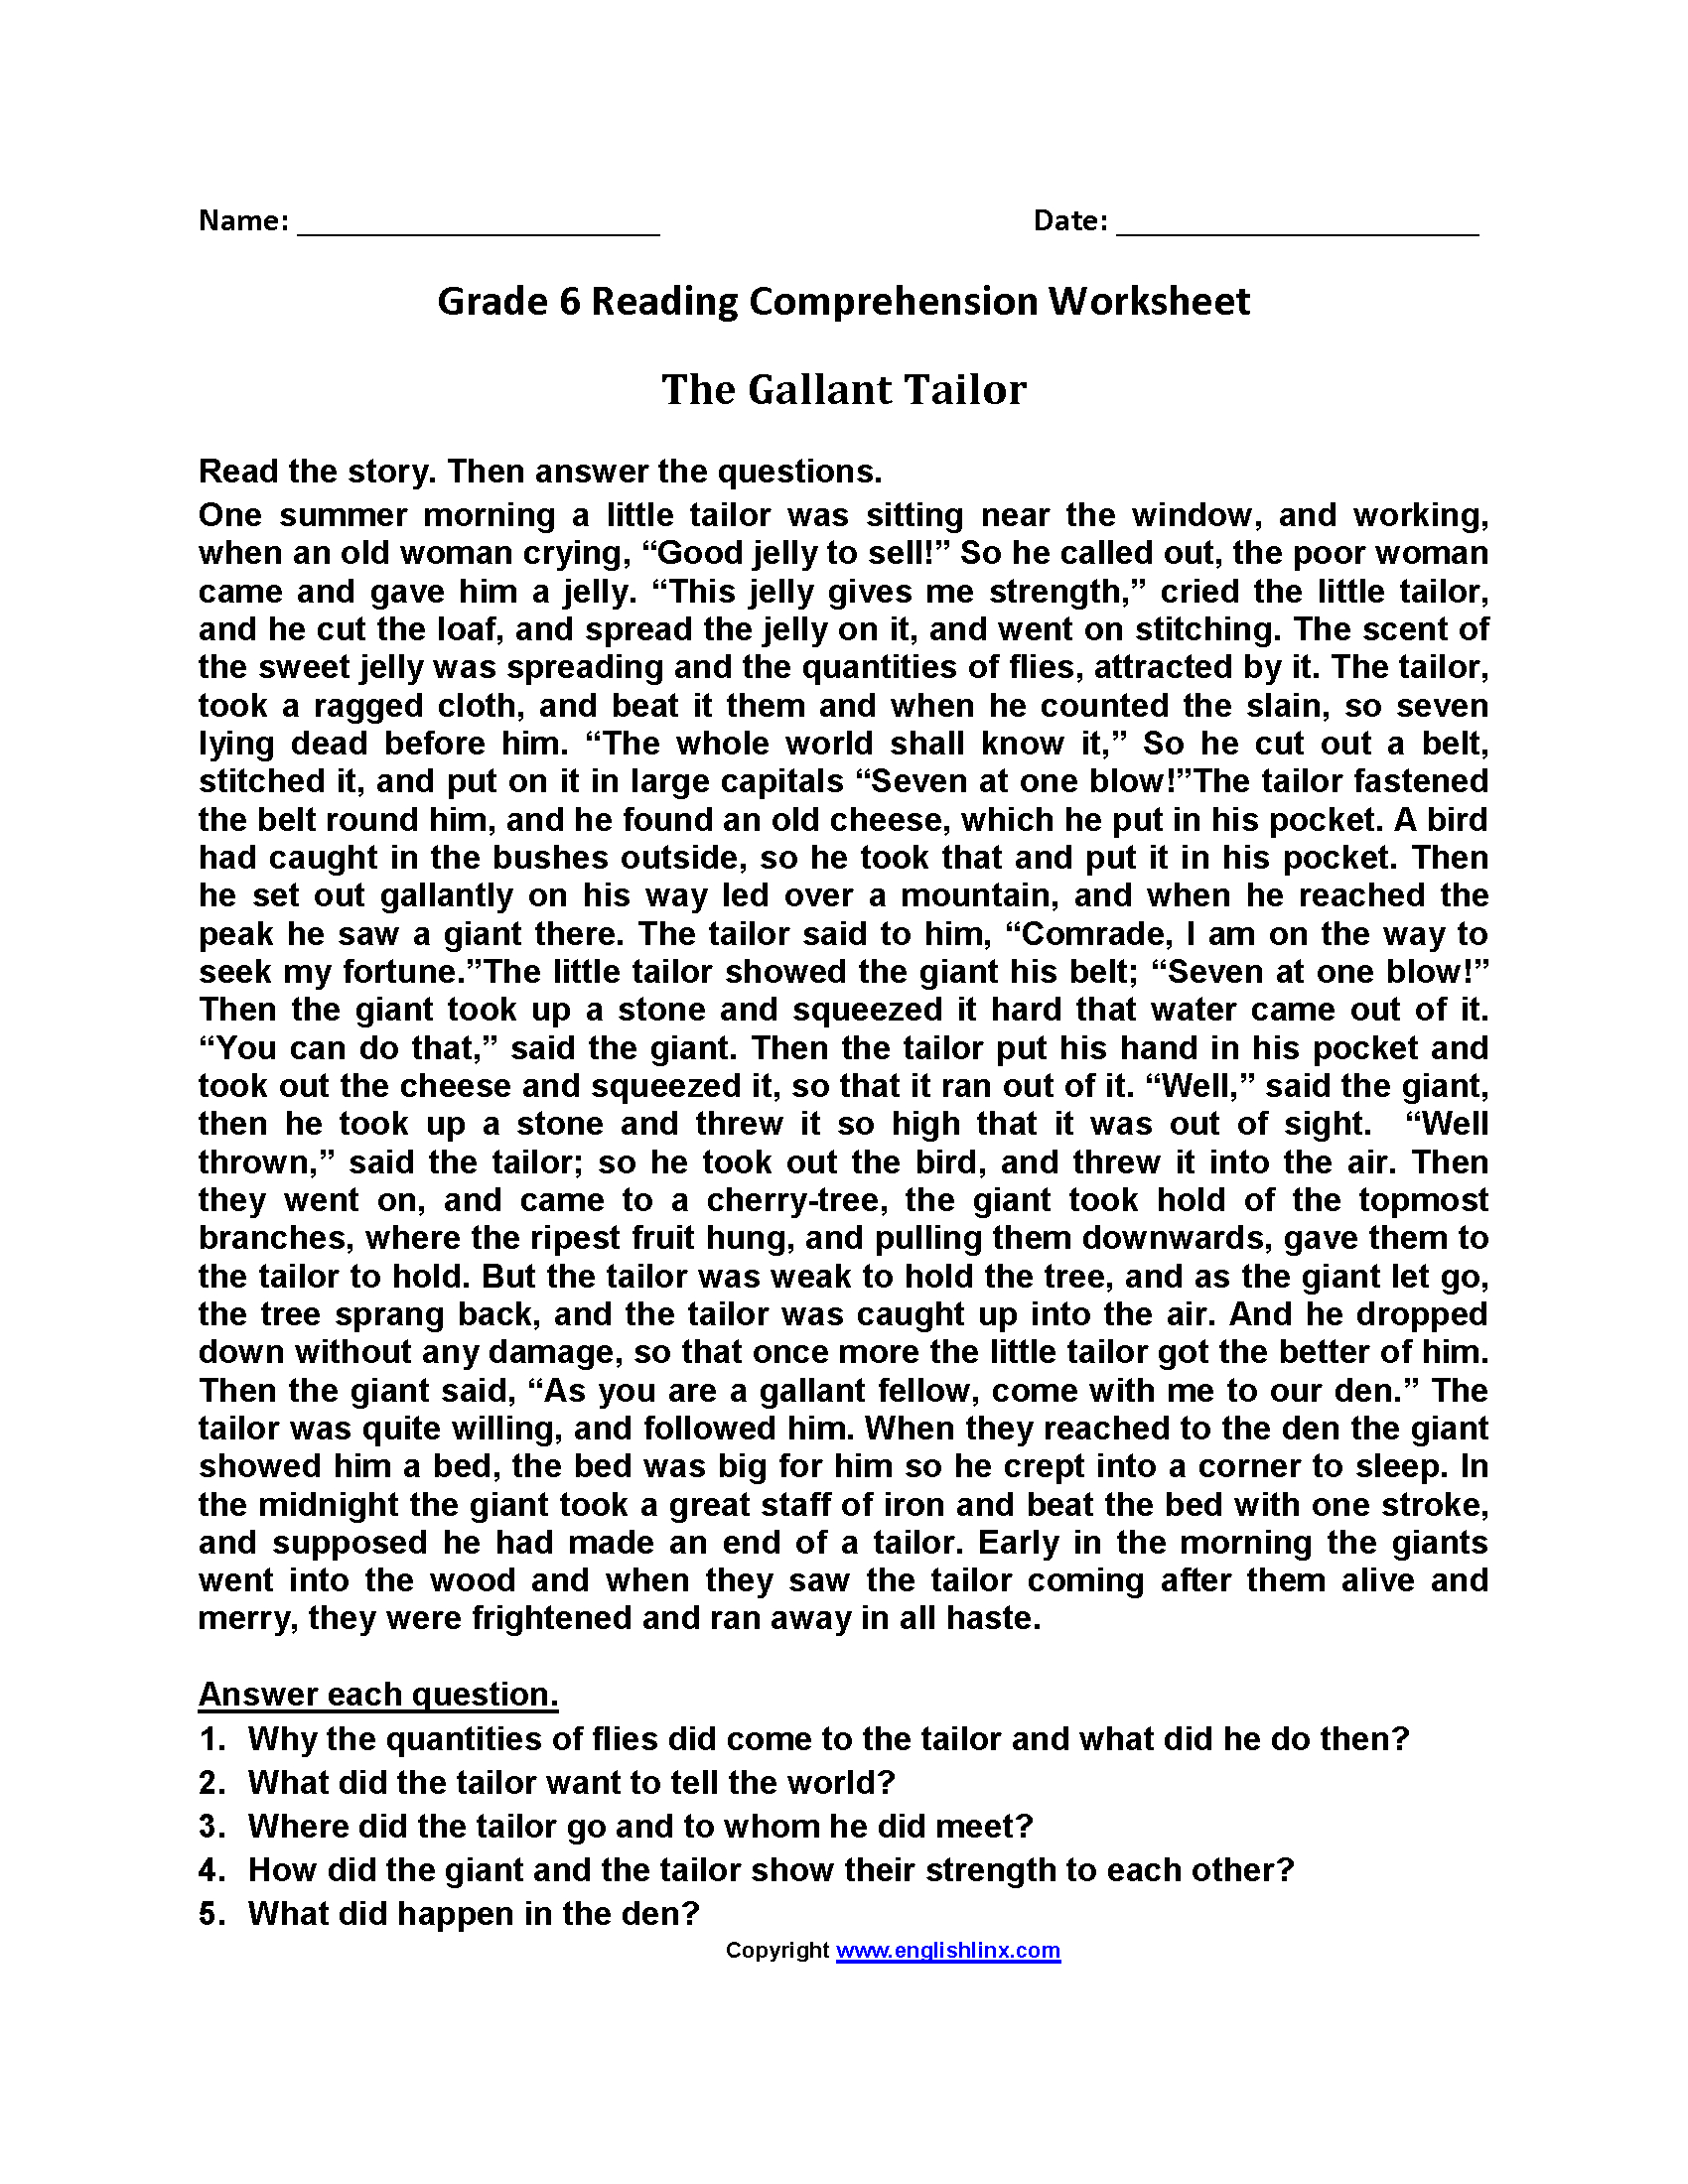 reading-comprehension-online-exercise-for-5th-grade-high-school-reading-comprehension